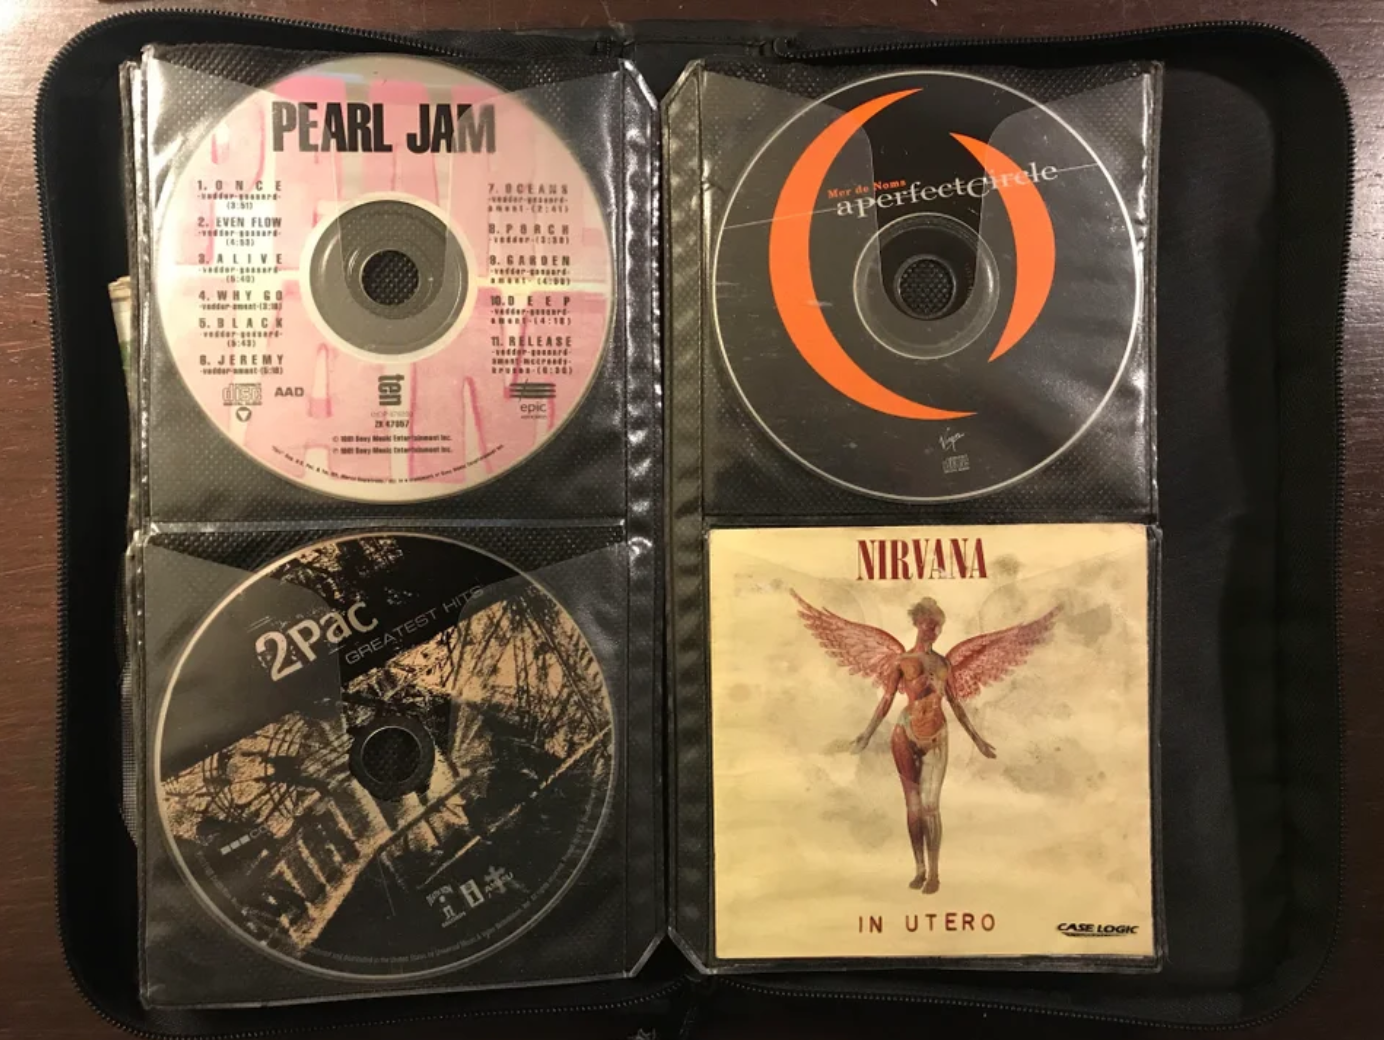 CD XX, the i see you CD. Картинки 90 х годов. Even Flow Pearl Jam. Warlock CD booklet.